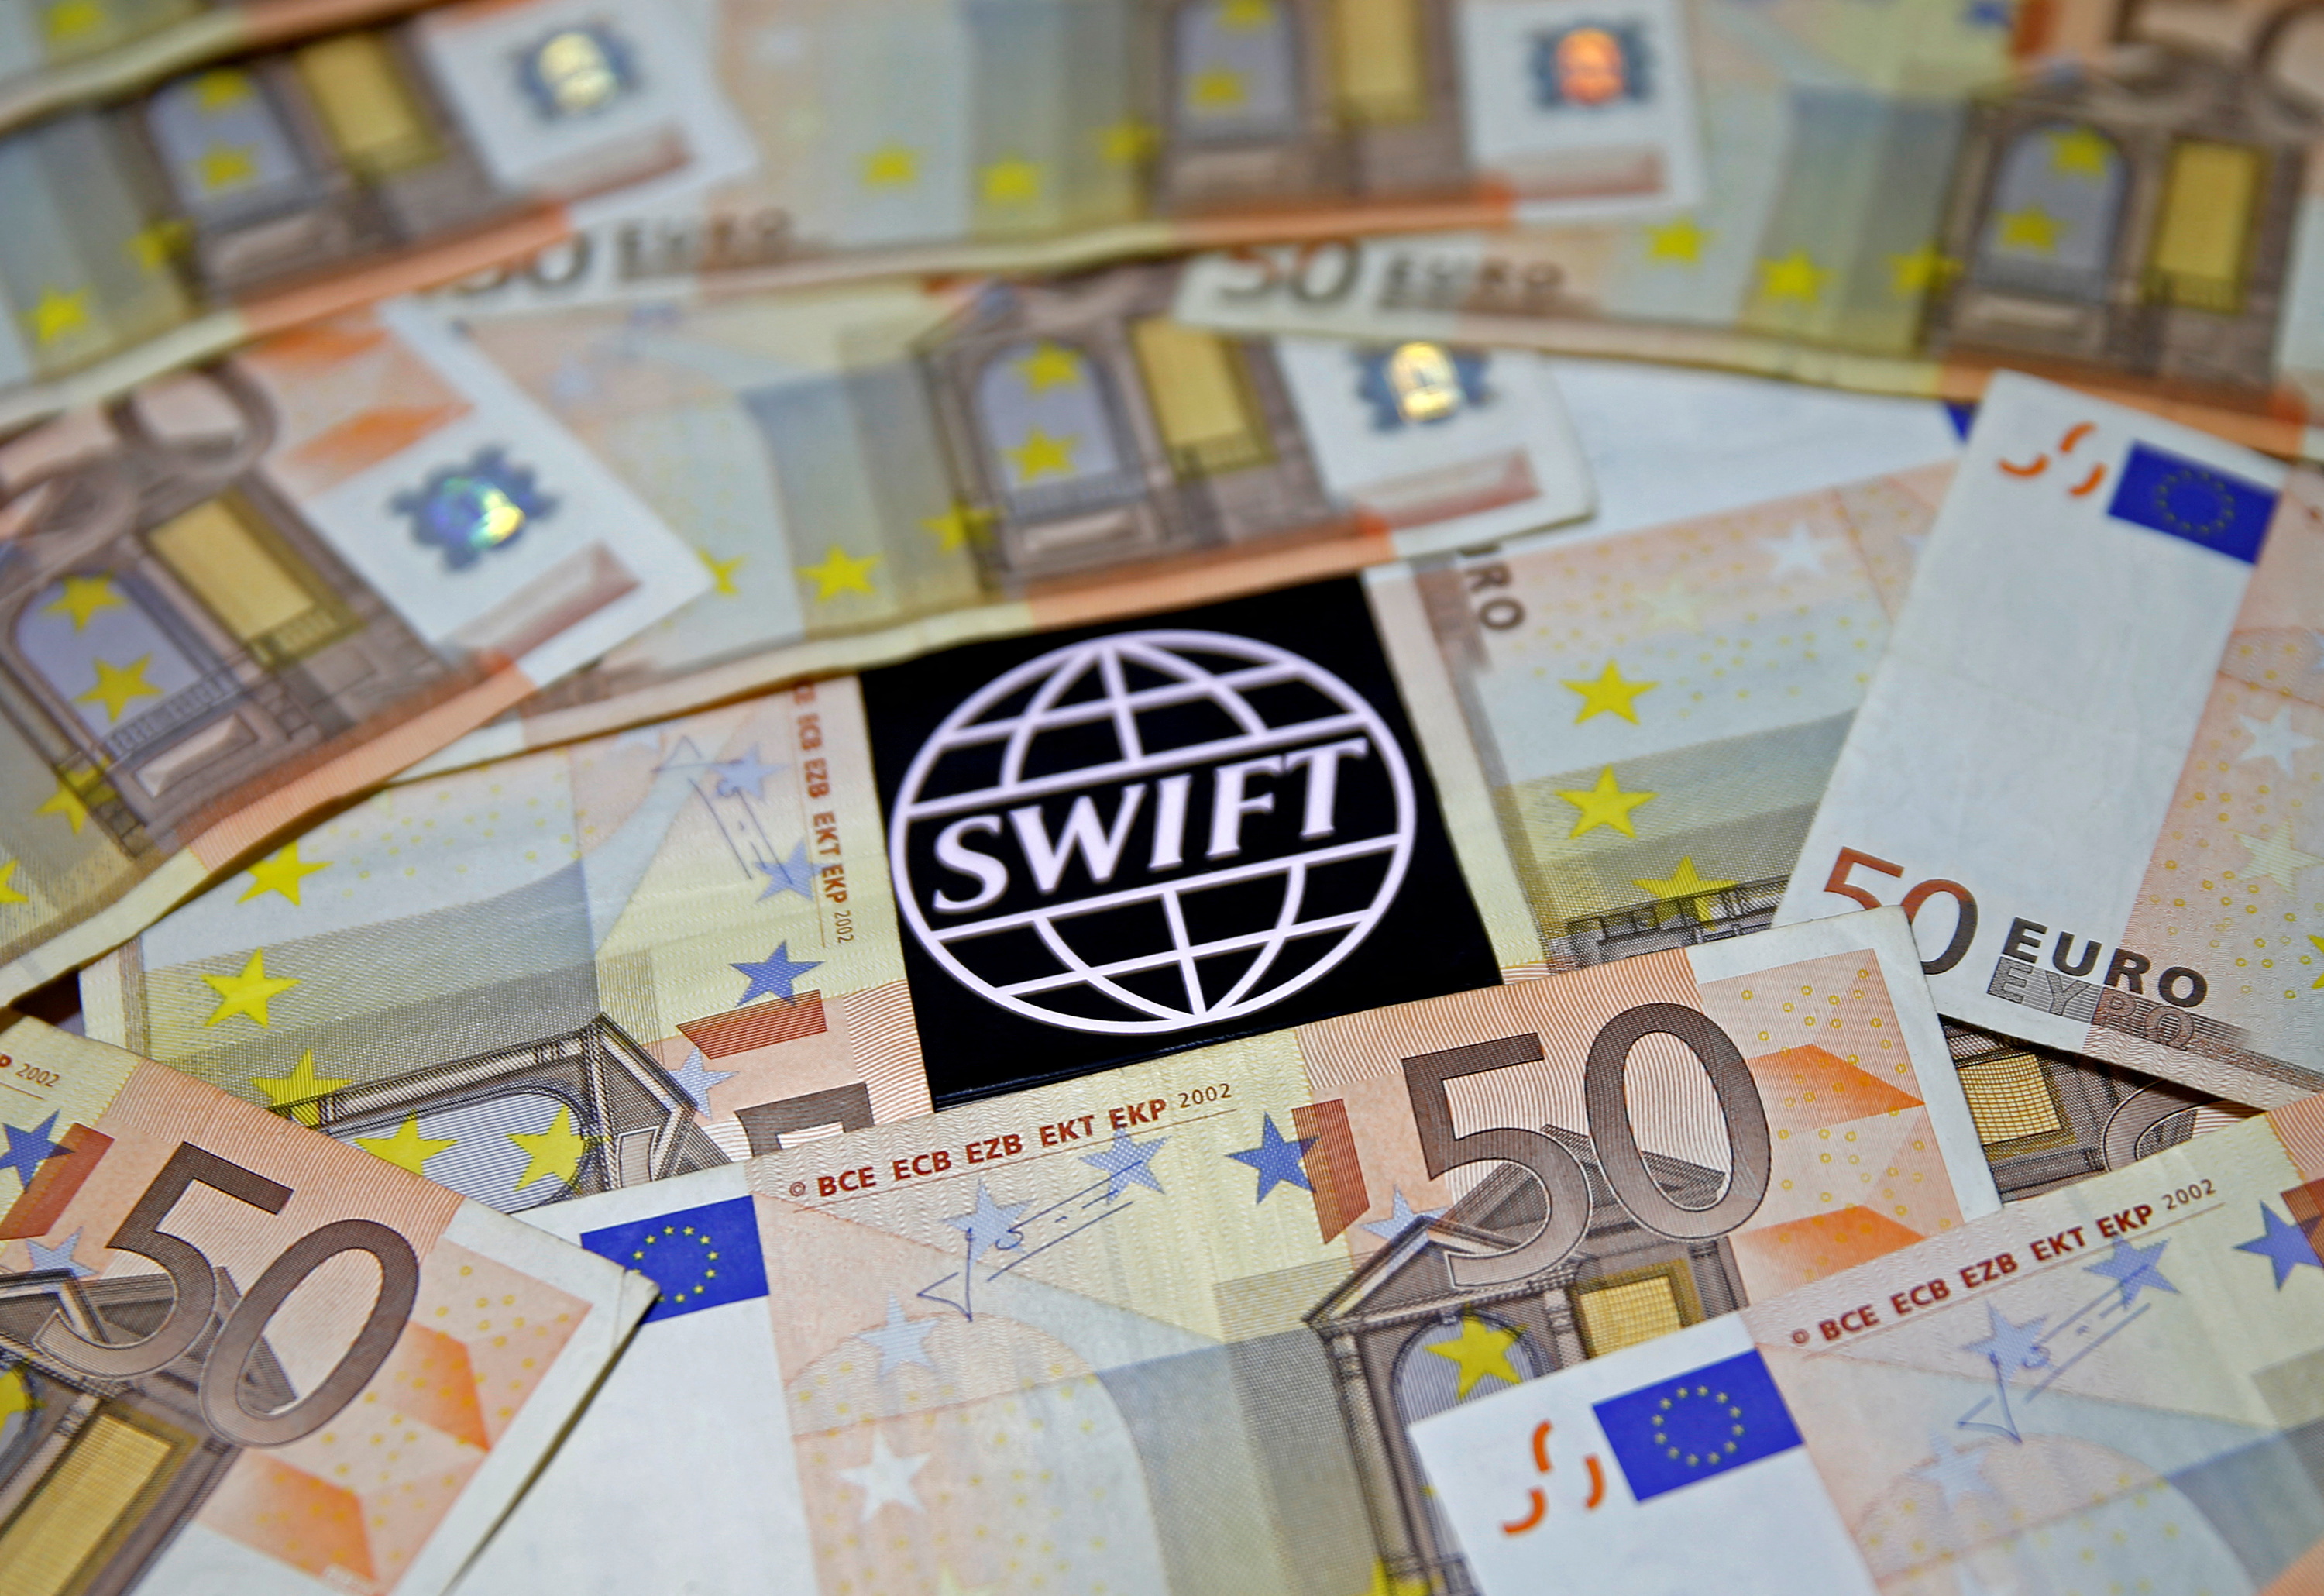 FILE PHOTO: Swift code bank logo is displayed on an iPhone 6s among Euro banknotes in this picture illustration